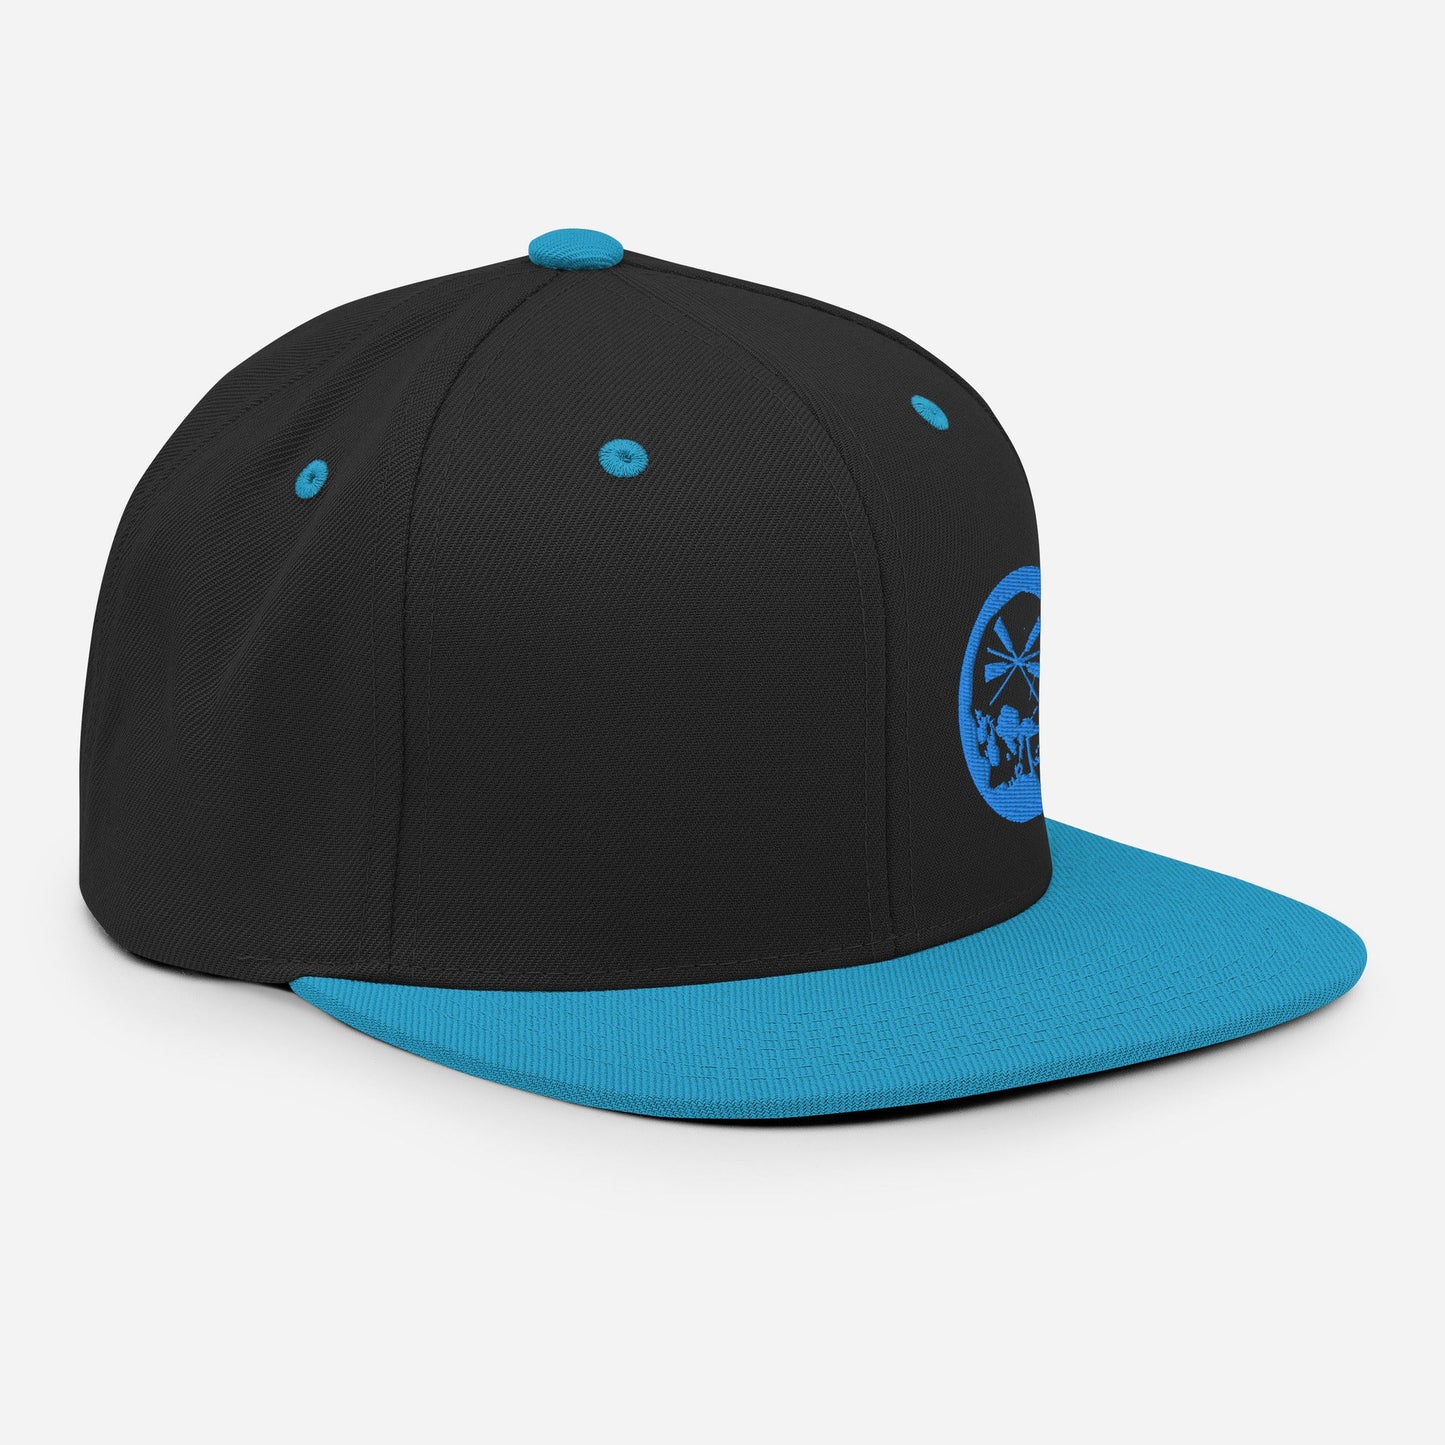 Casquette Snapback Brodé bleu The Needles Factory Free Shipping - The Needles Factory